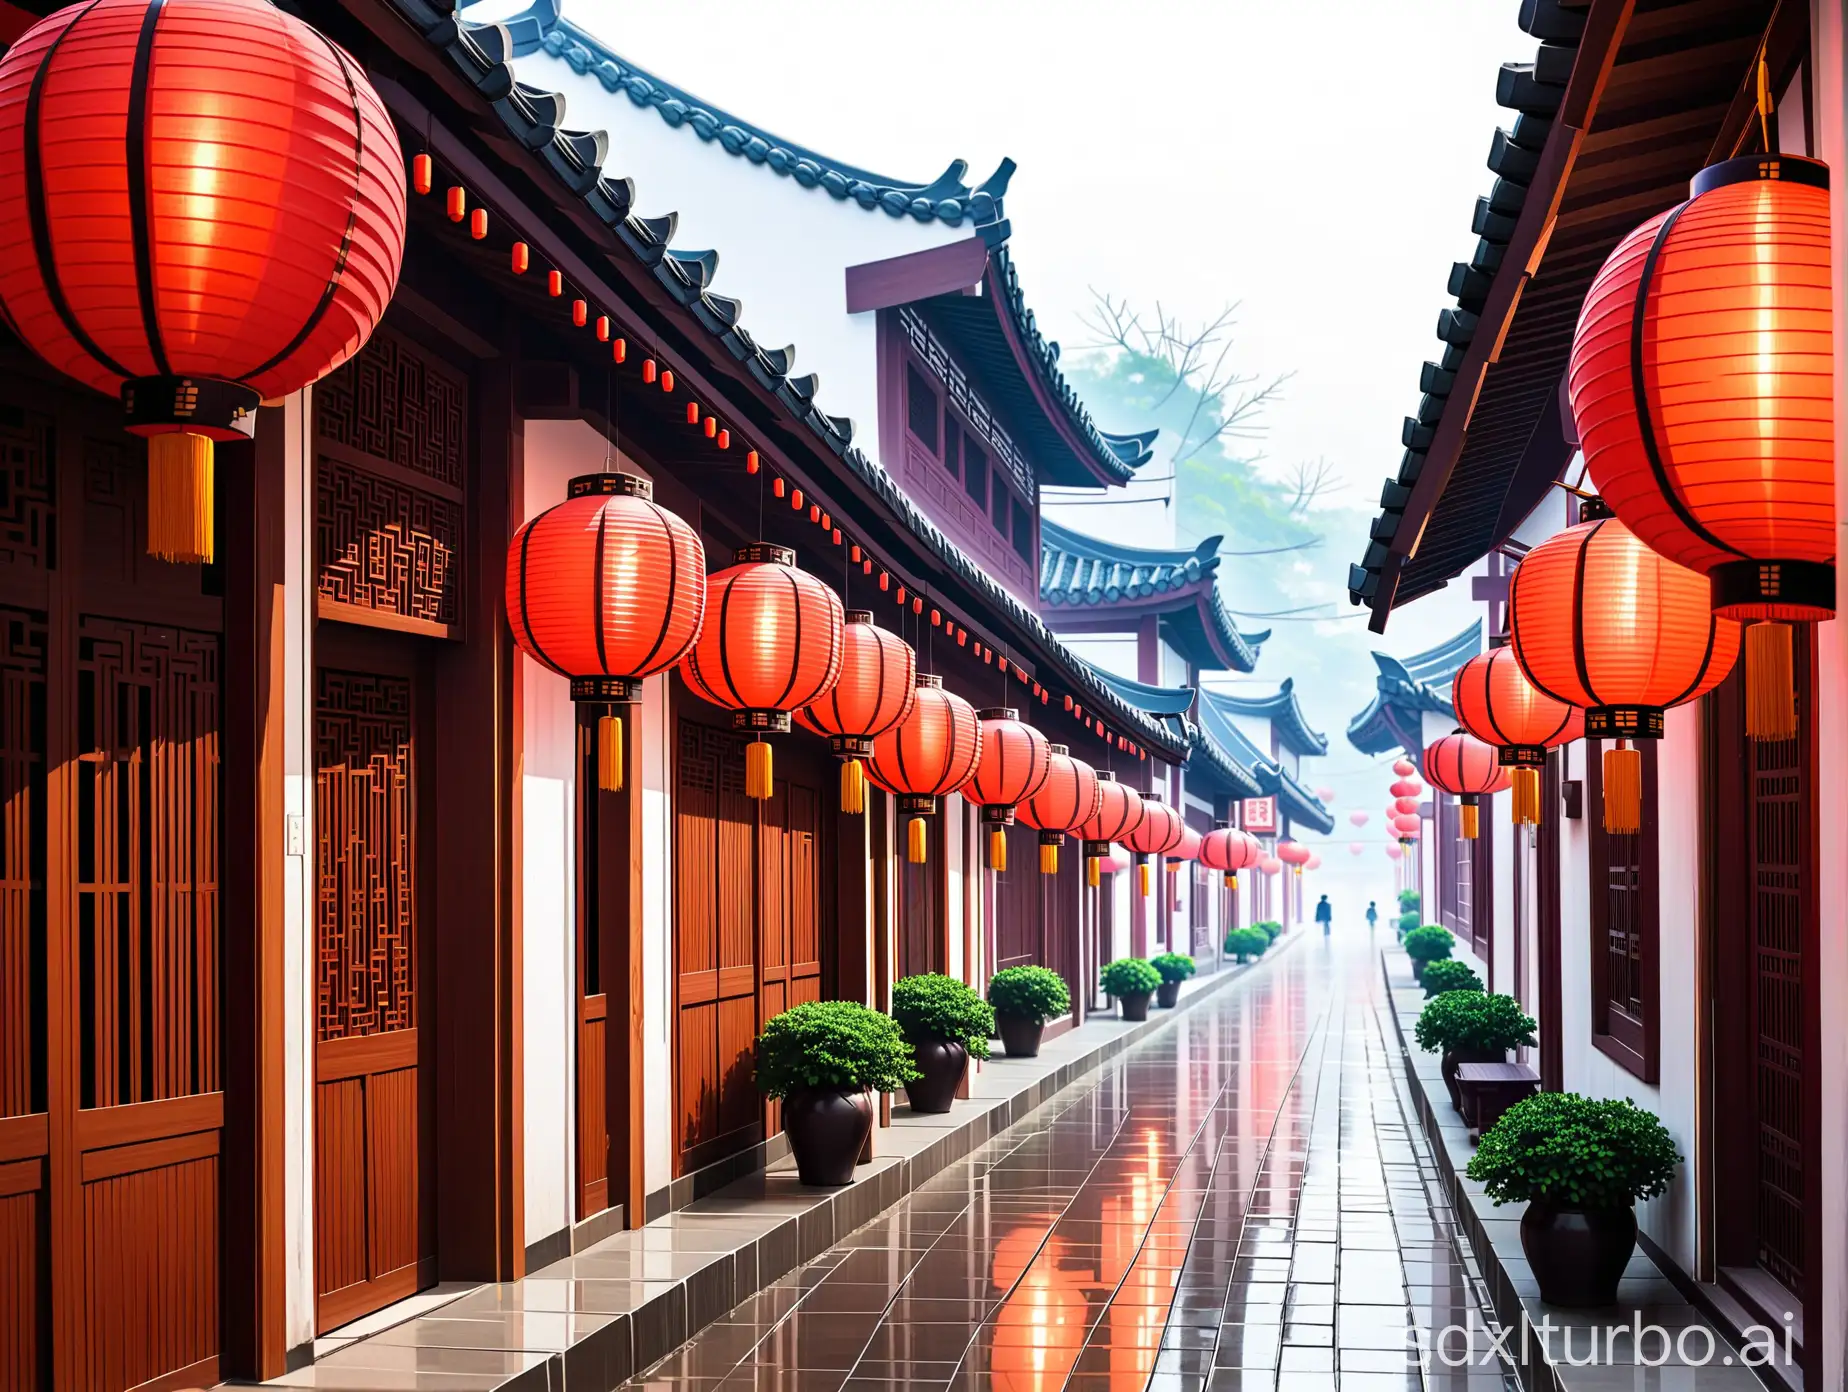 The quaint streets of a small town in Anhui, with morning mist lingering, are lined with red lanterns, creating a warm and traditional Chinese atmosphere.